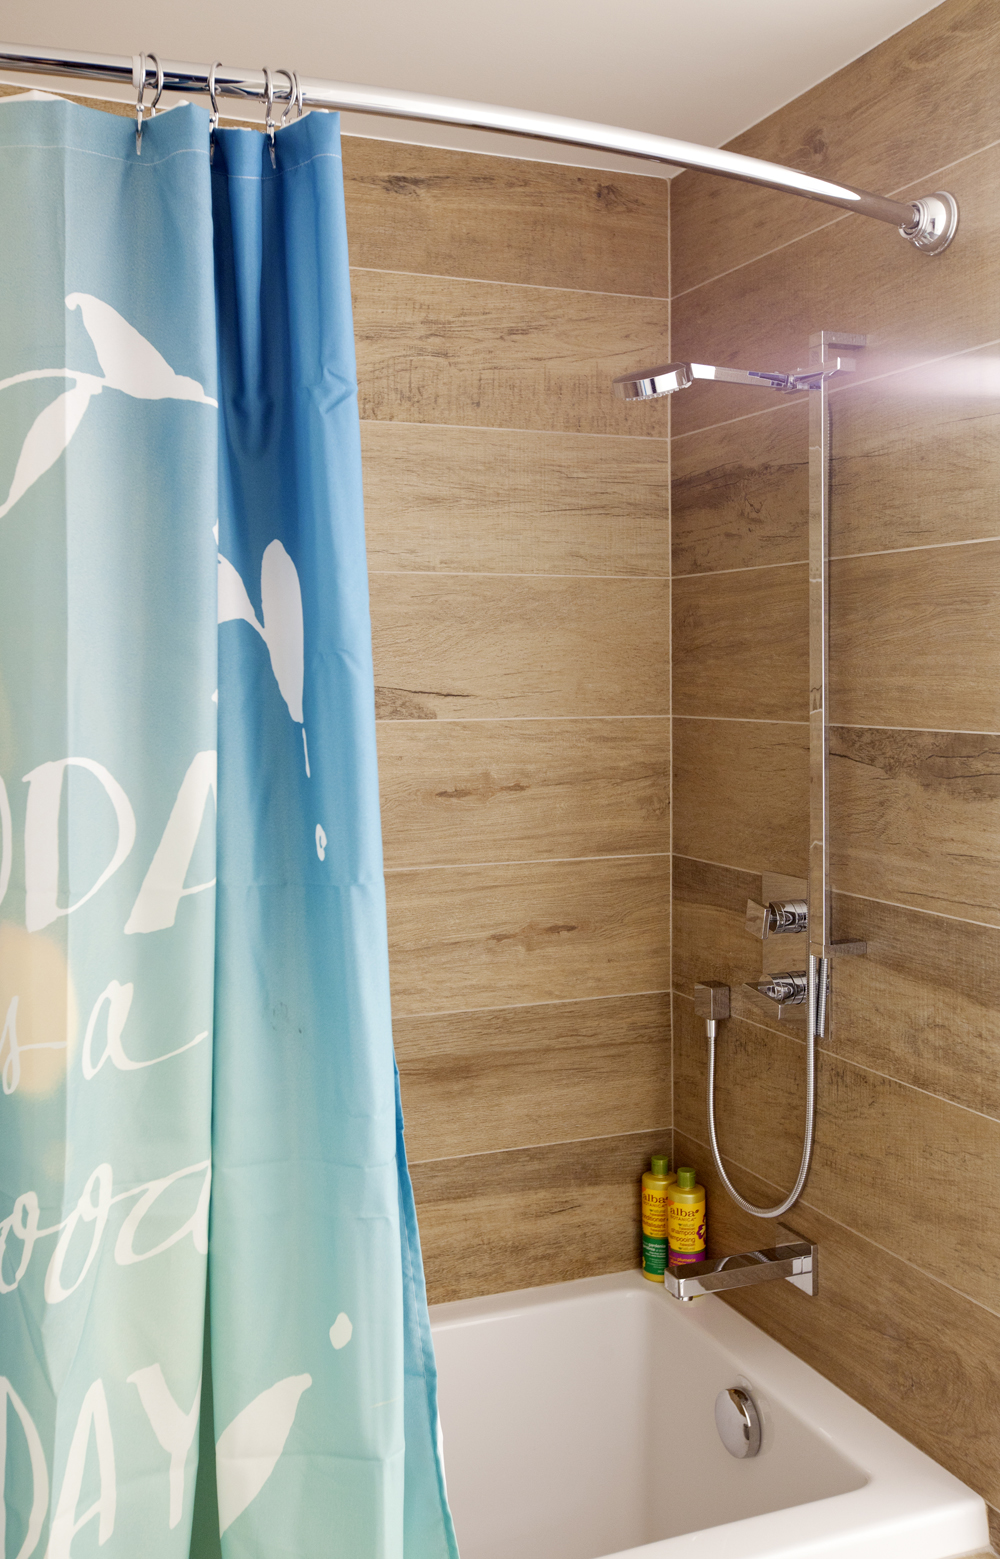 An outdoorsy bathroom renovation with wood-inspired tiles paired with summery shower curtains